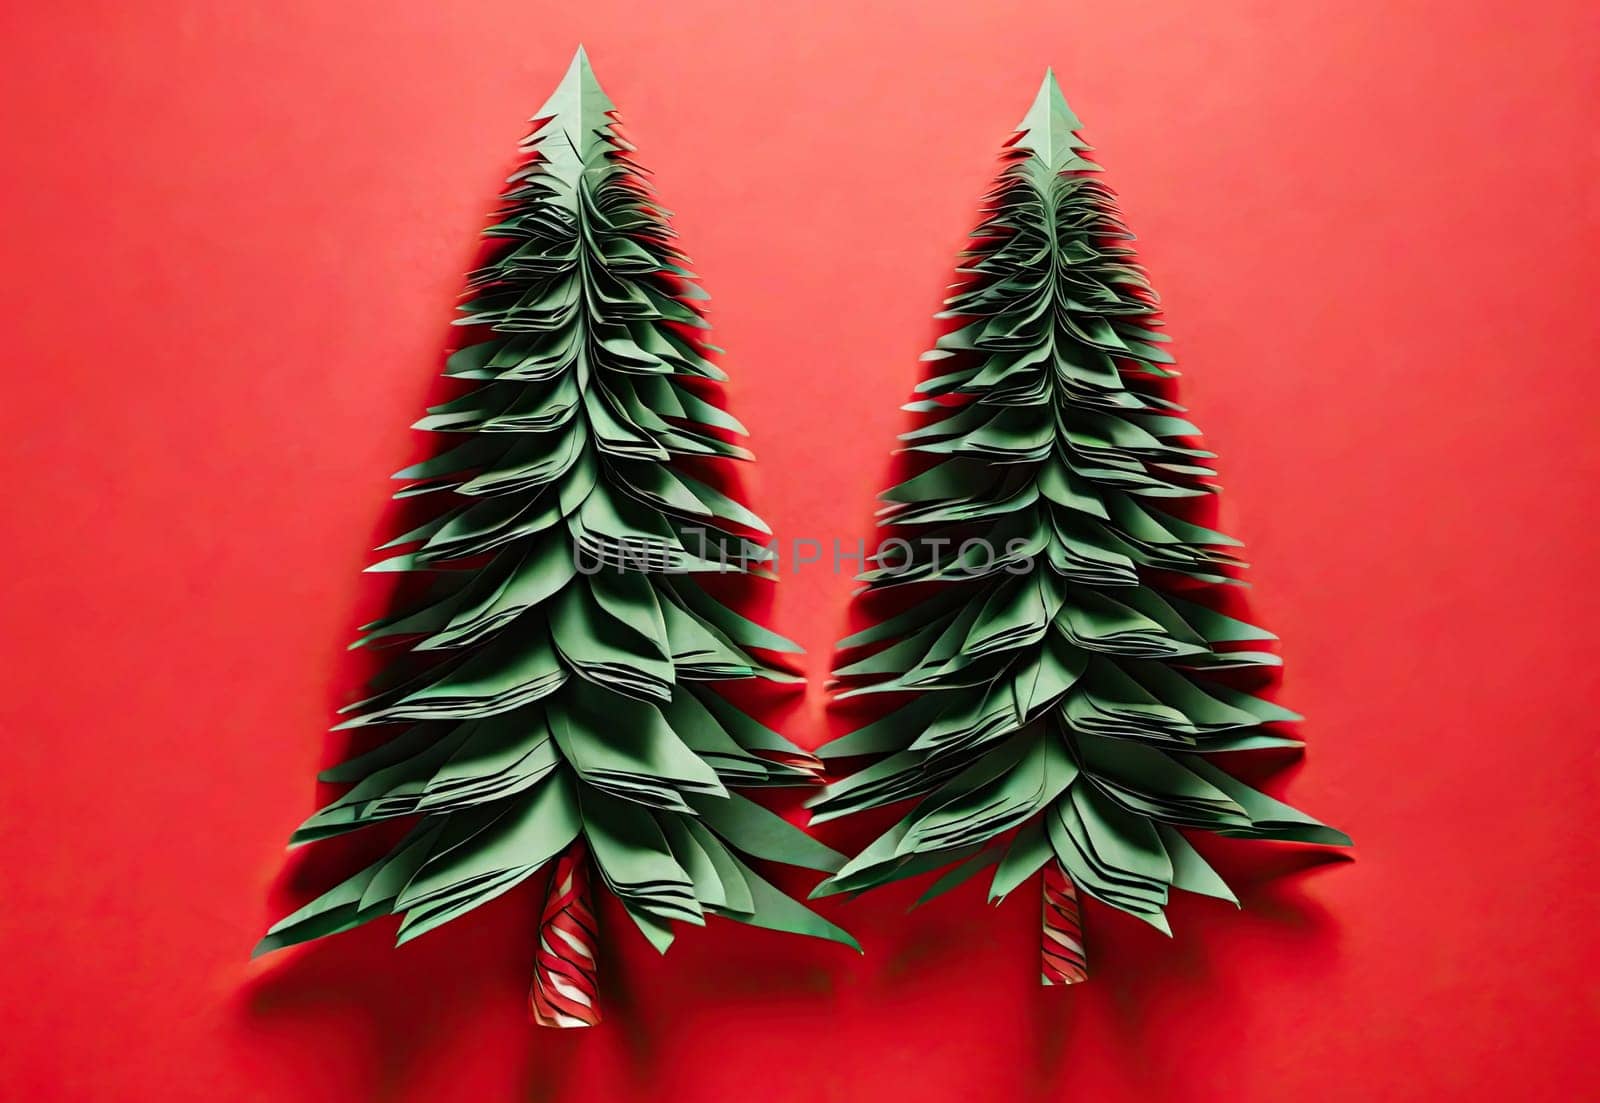 Christmas trees made of paper by Ladouski